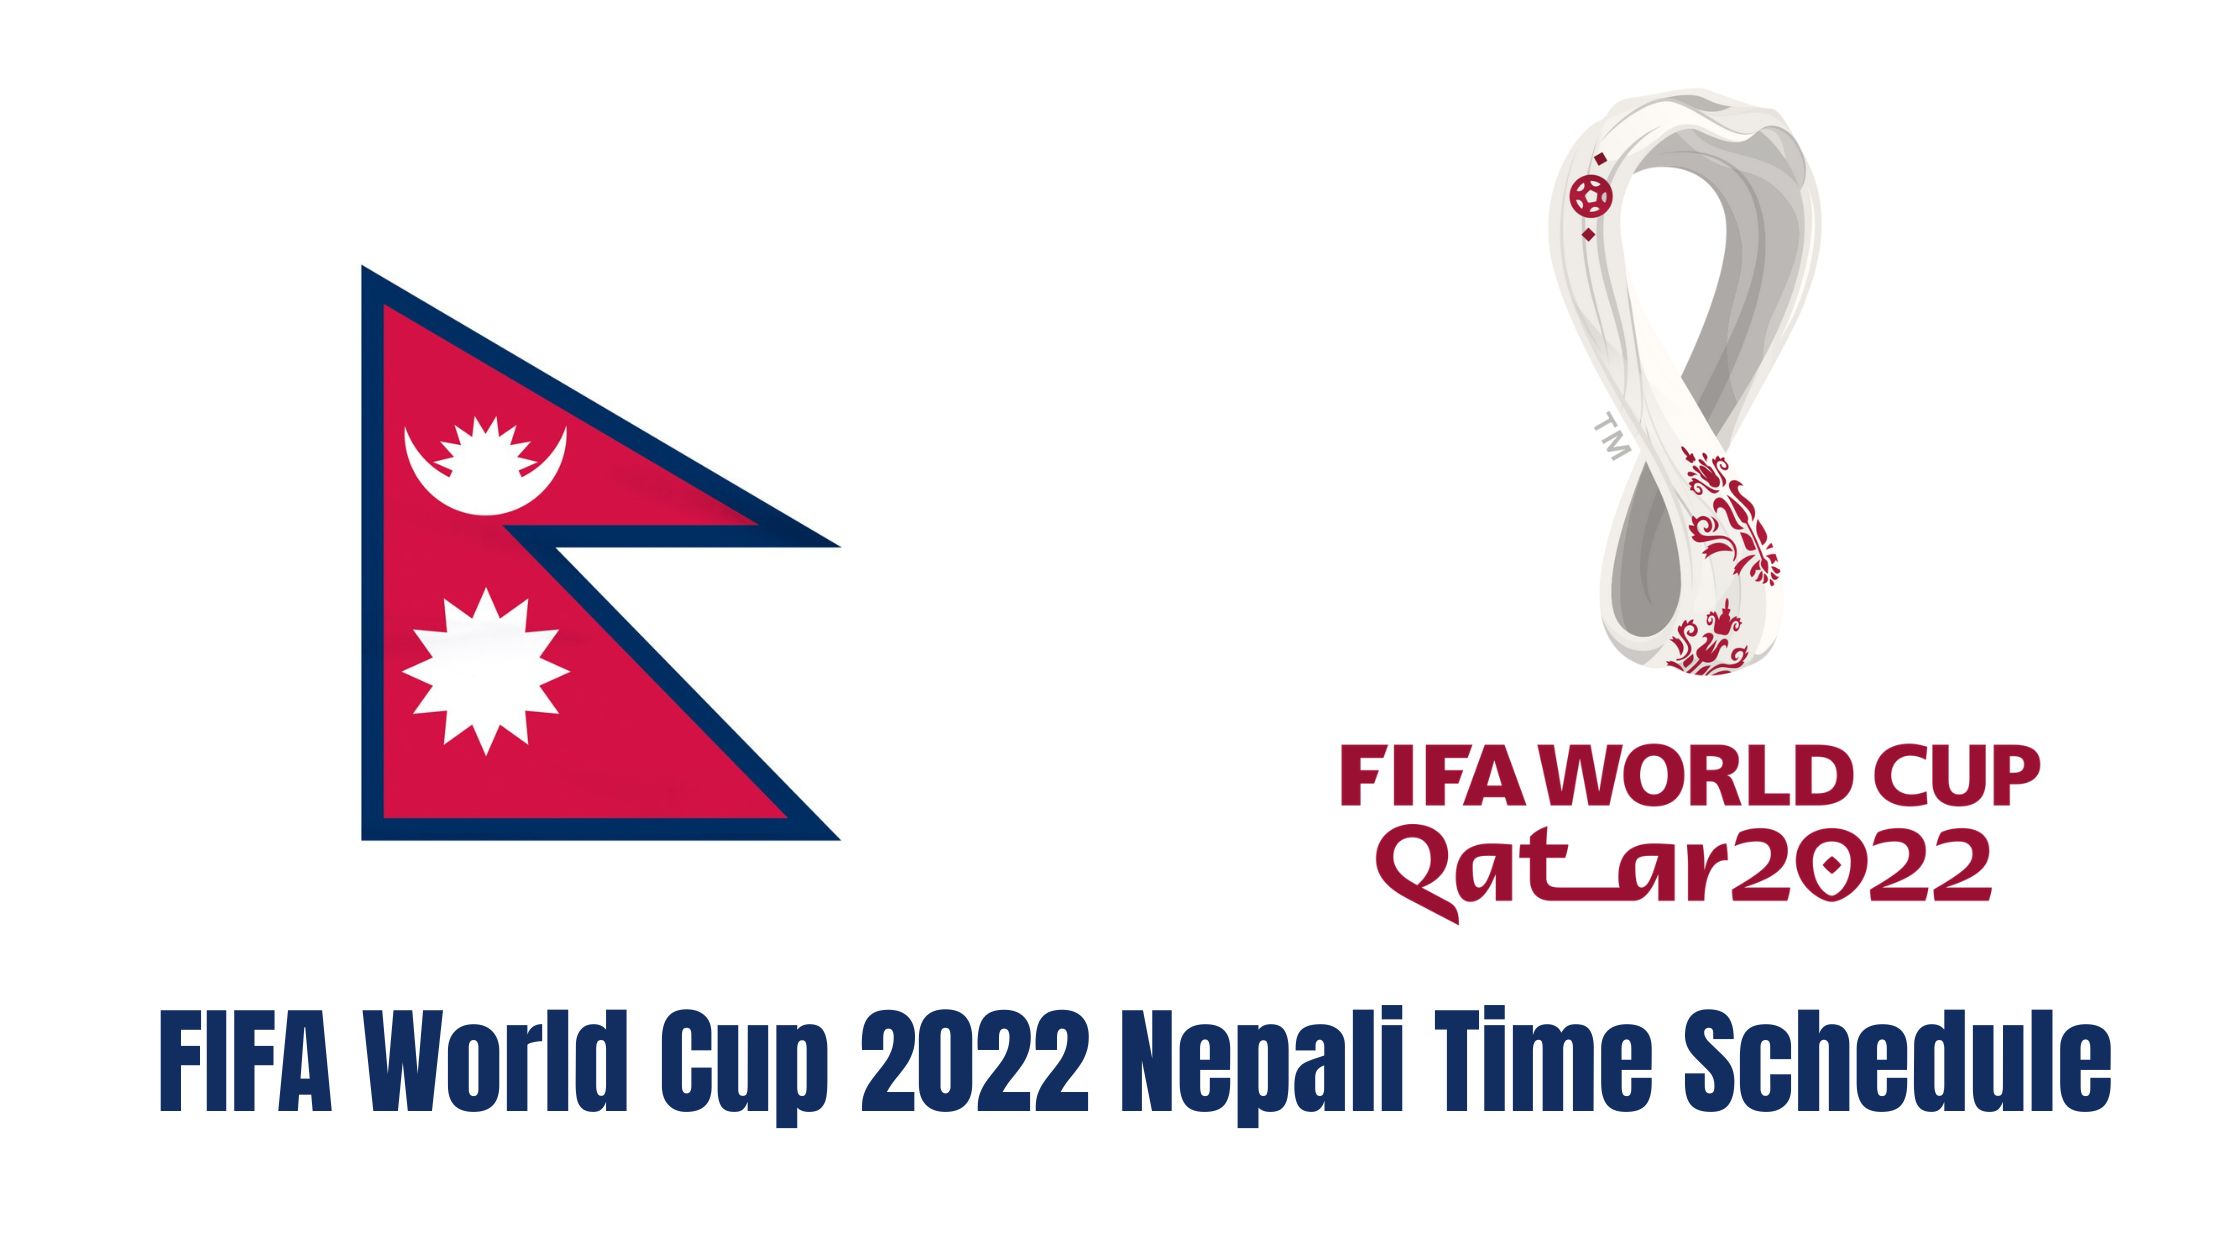 FIFA World Cup 2022 Nepali Time Schedule